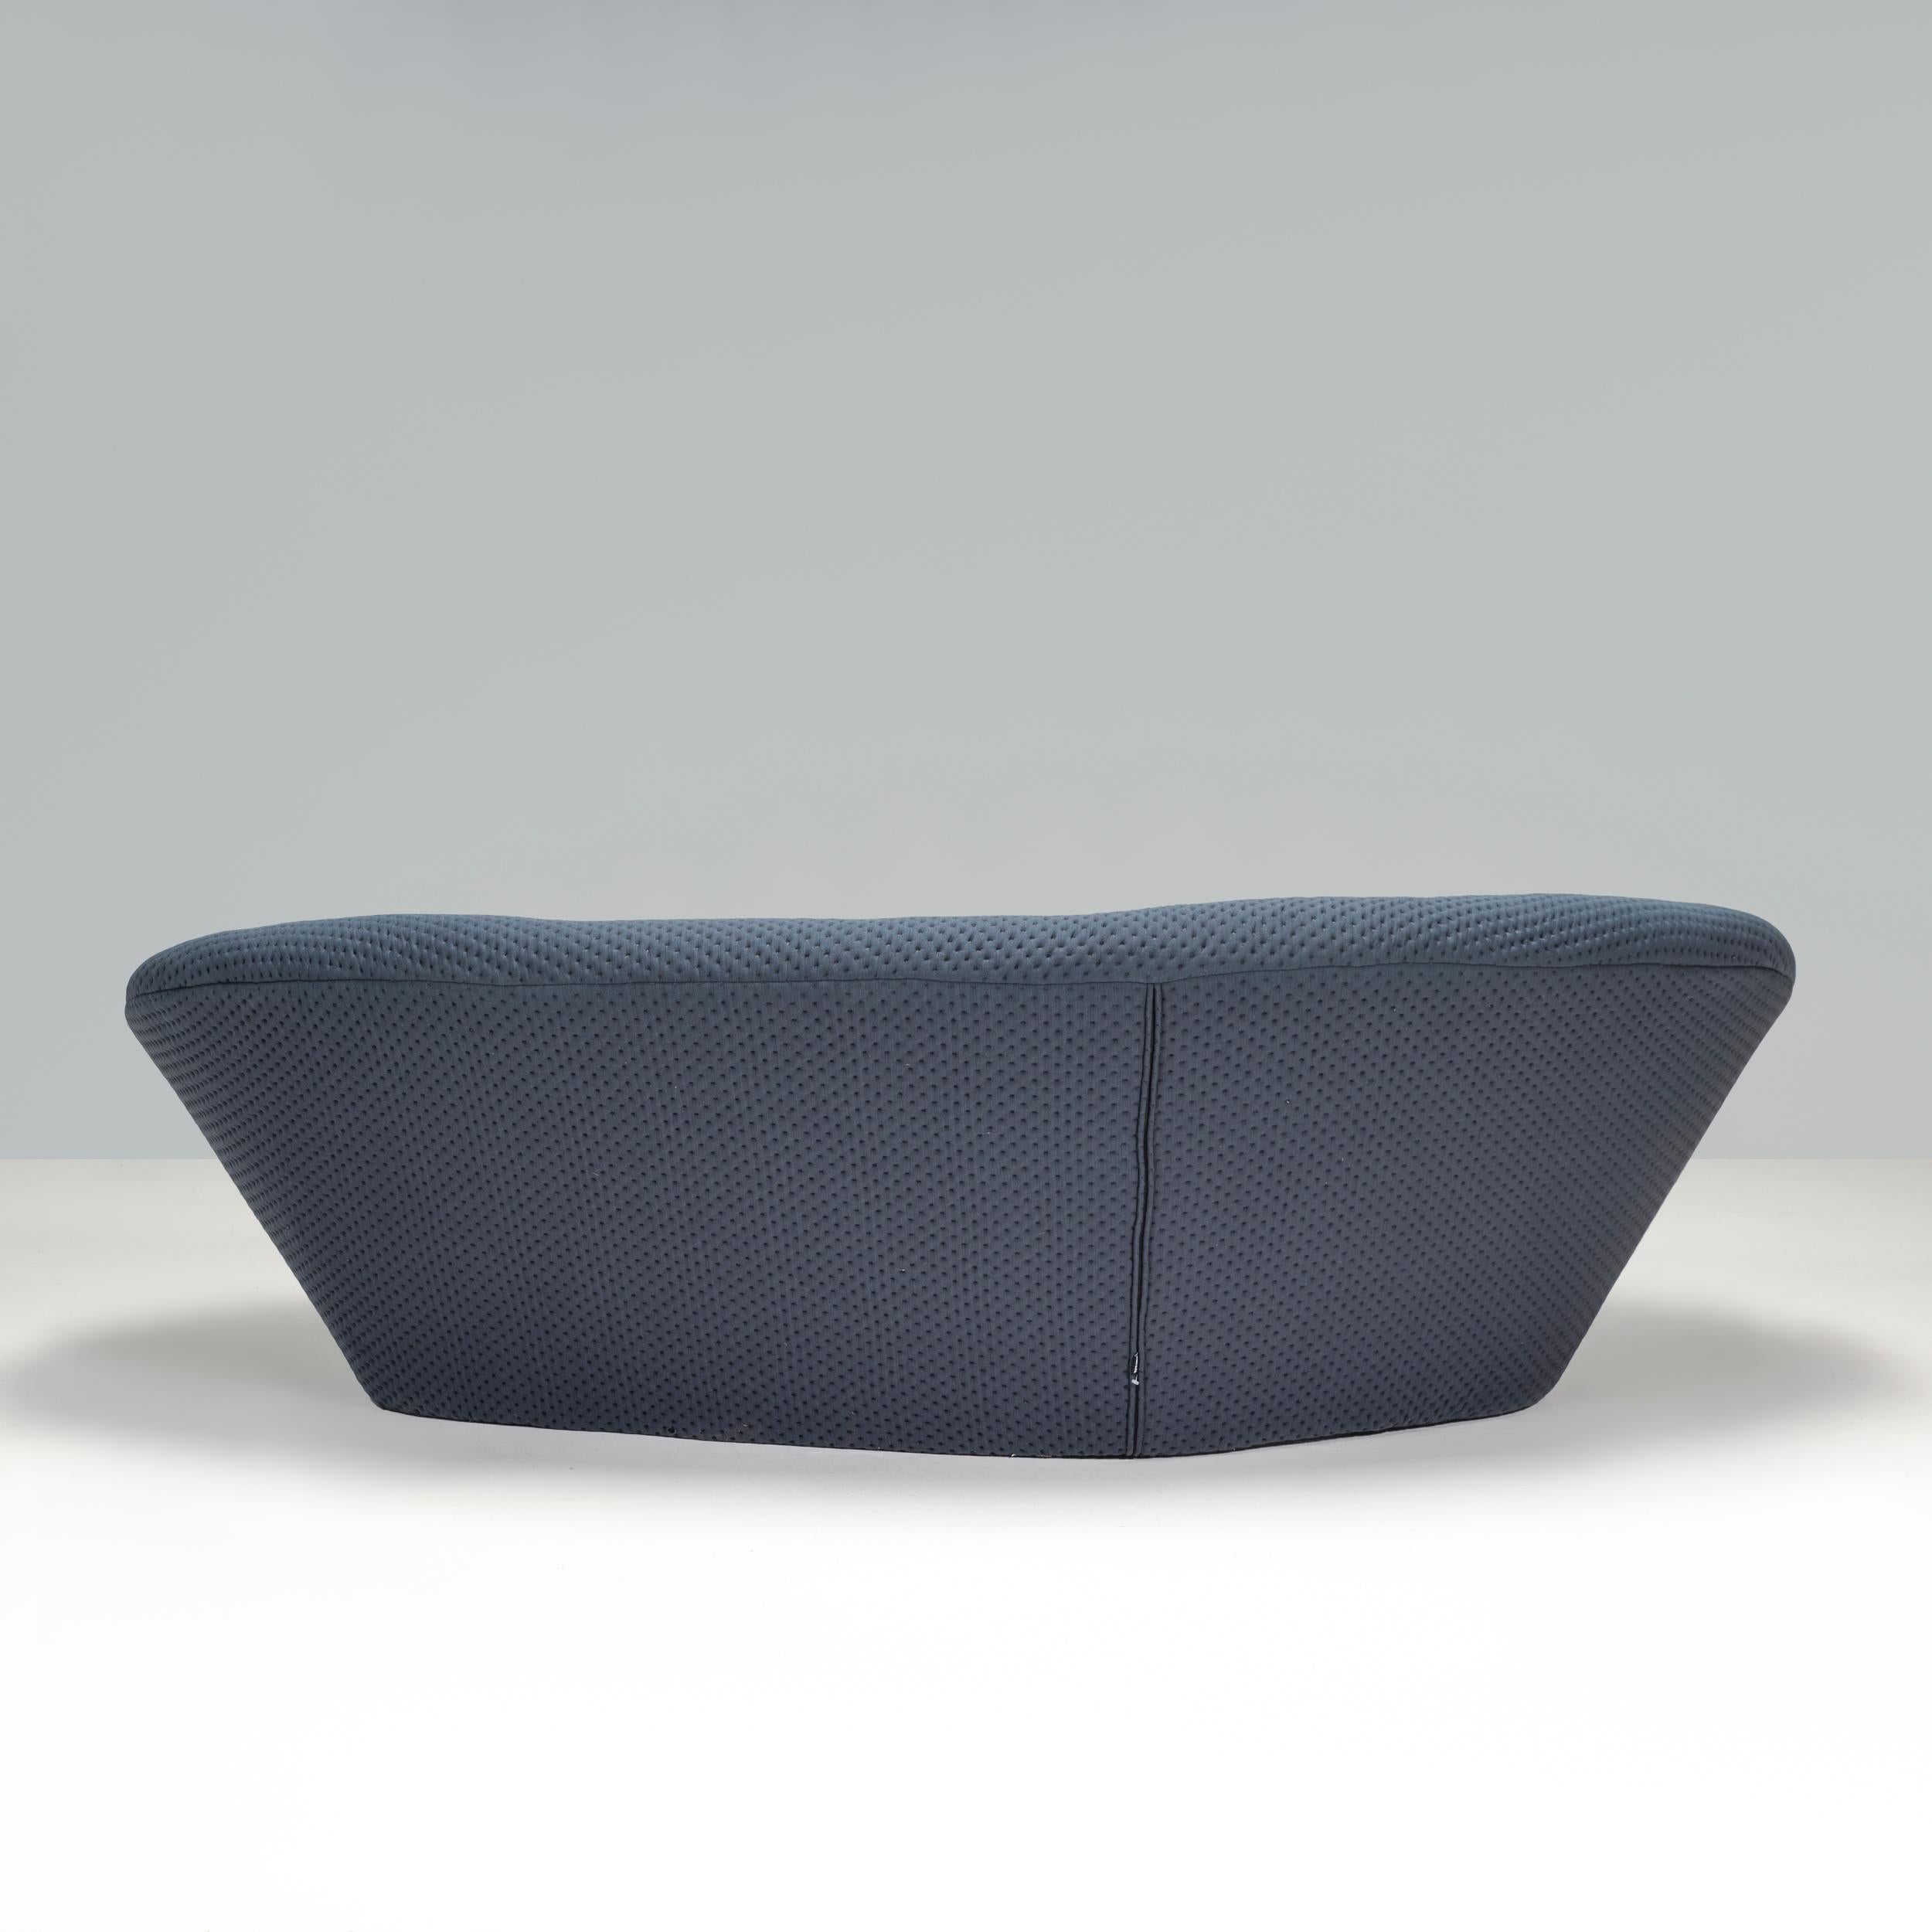 Ligne Roset by Erwan & Ronan Bouroullec Ploum High Back Blue Sofa In Good Condition For Sale In London, GB